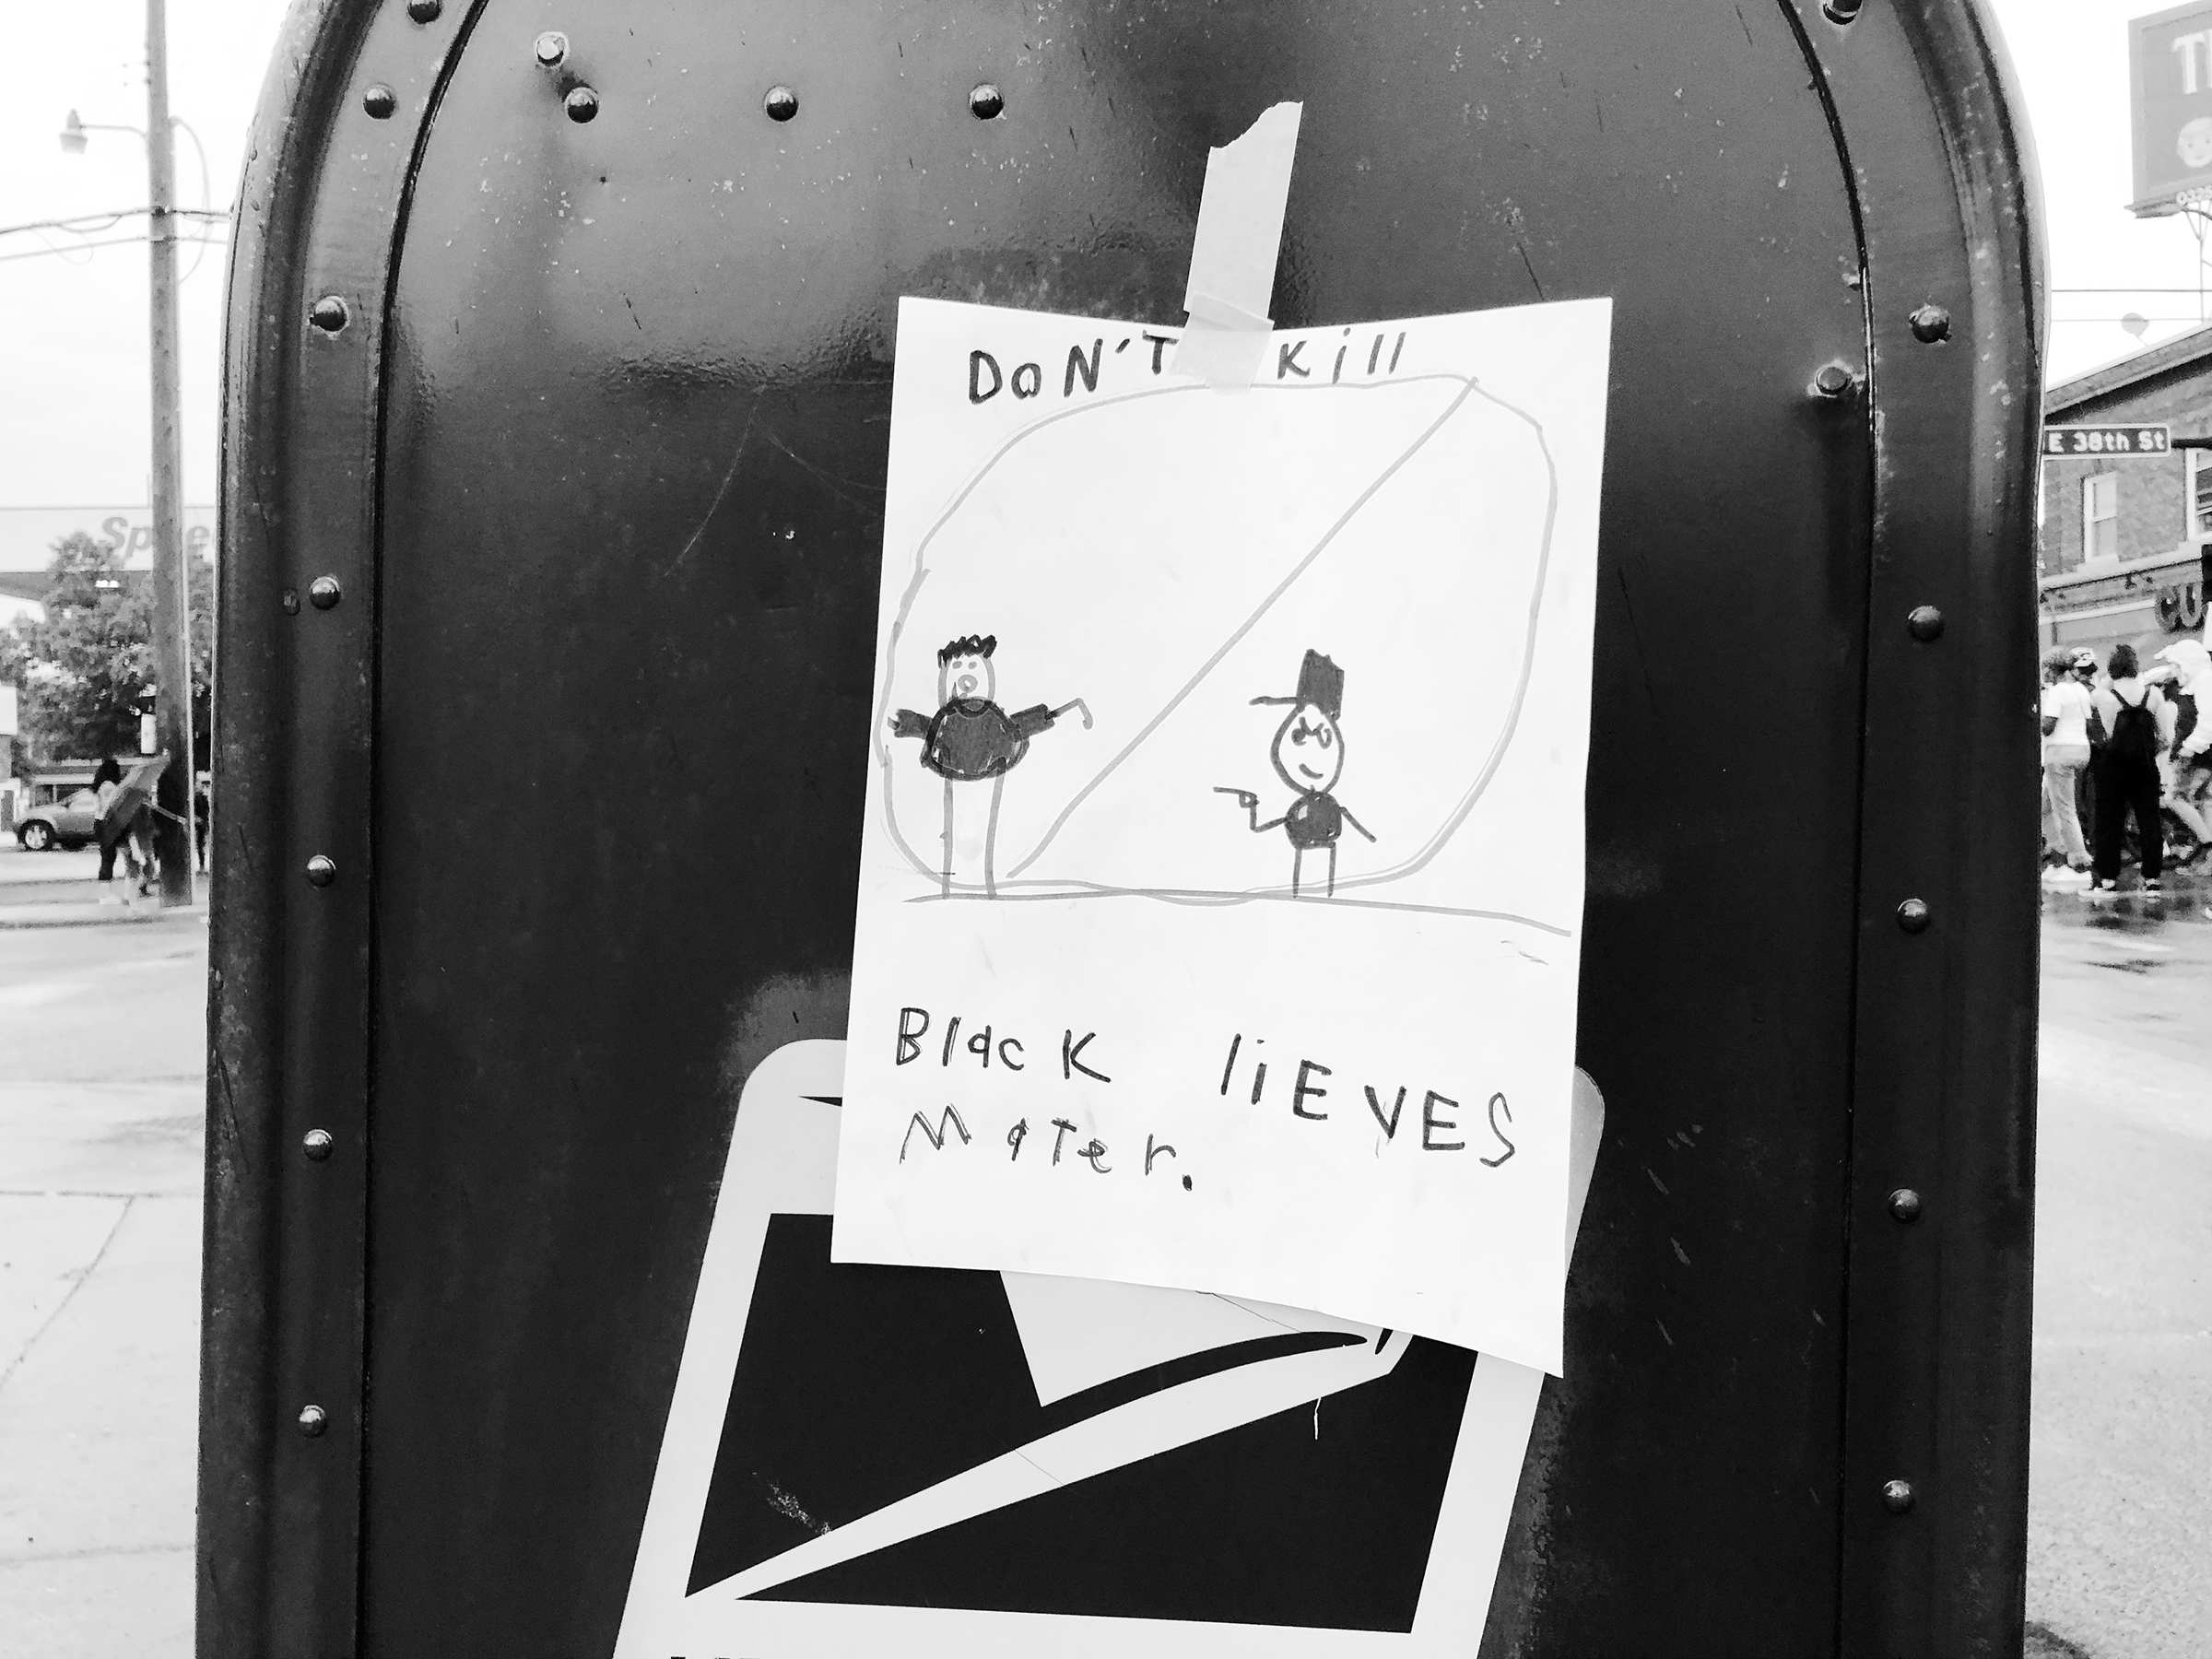 A child's drawing on a mailbox in Minneapolis on May 27. (Patience Zalanga)